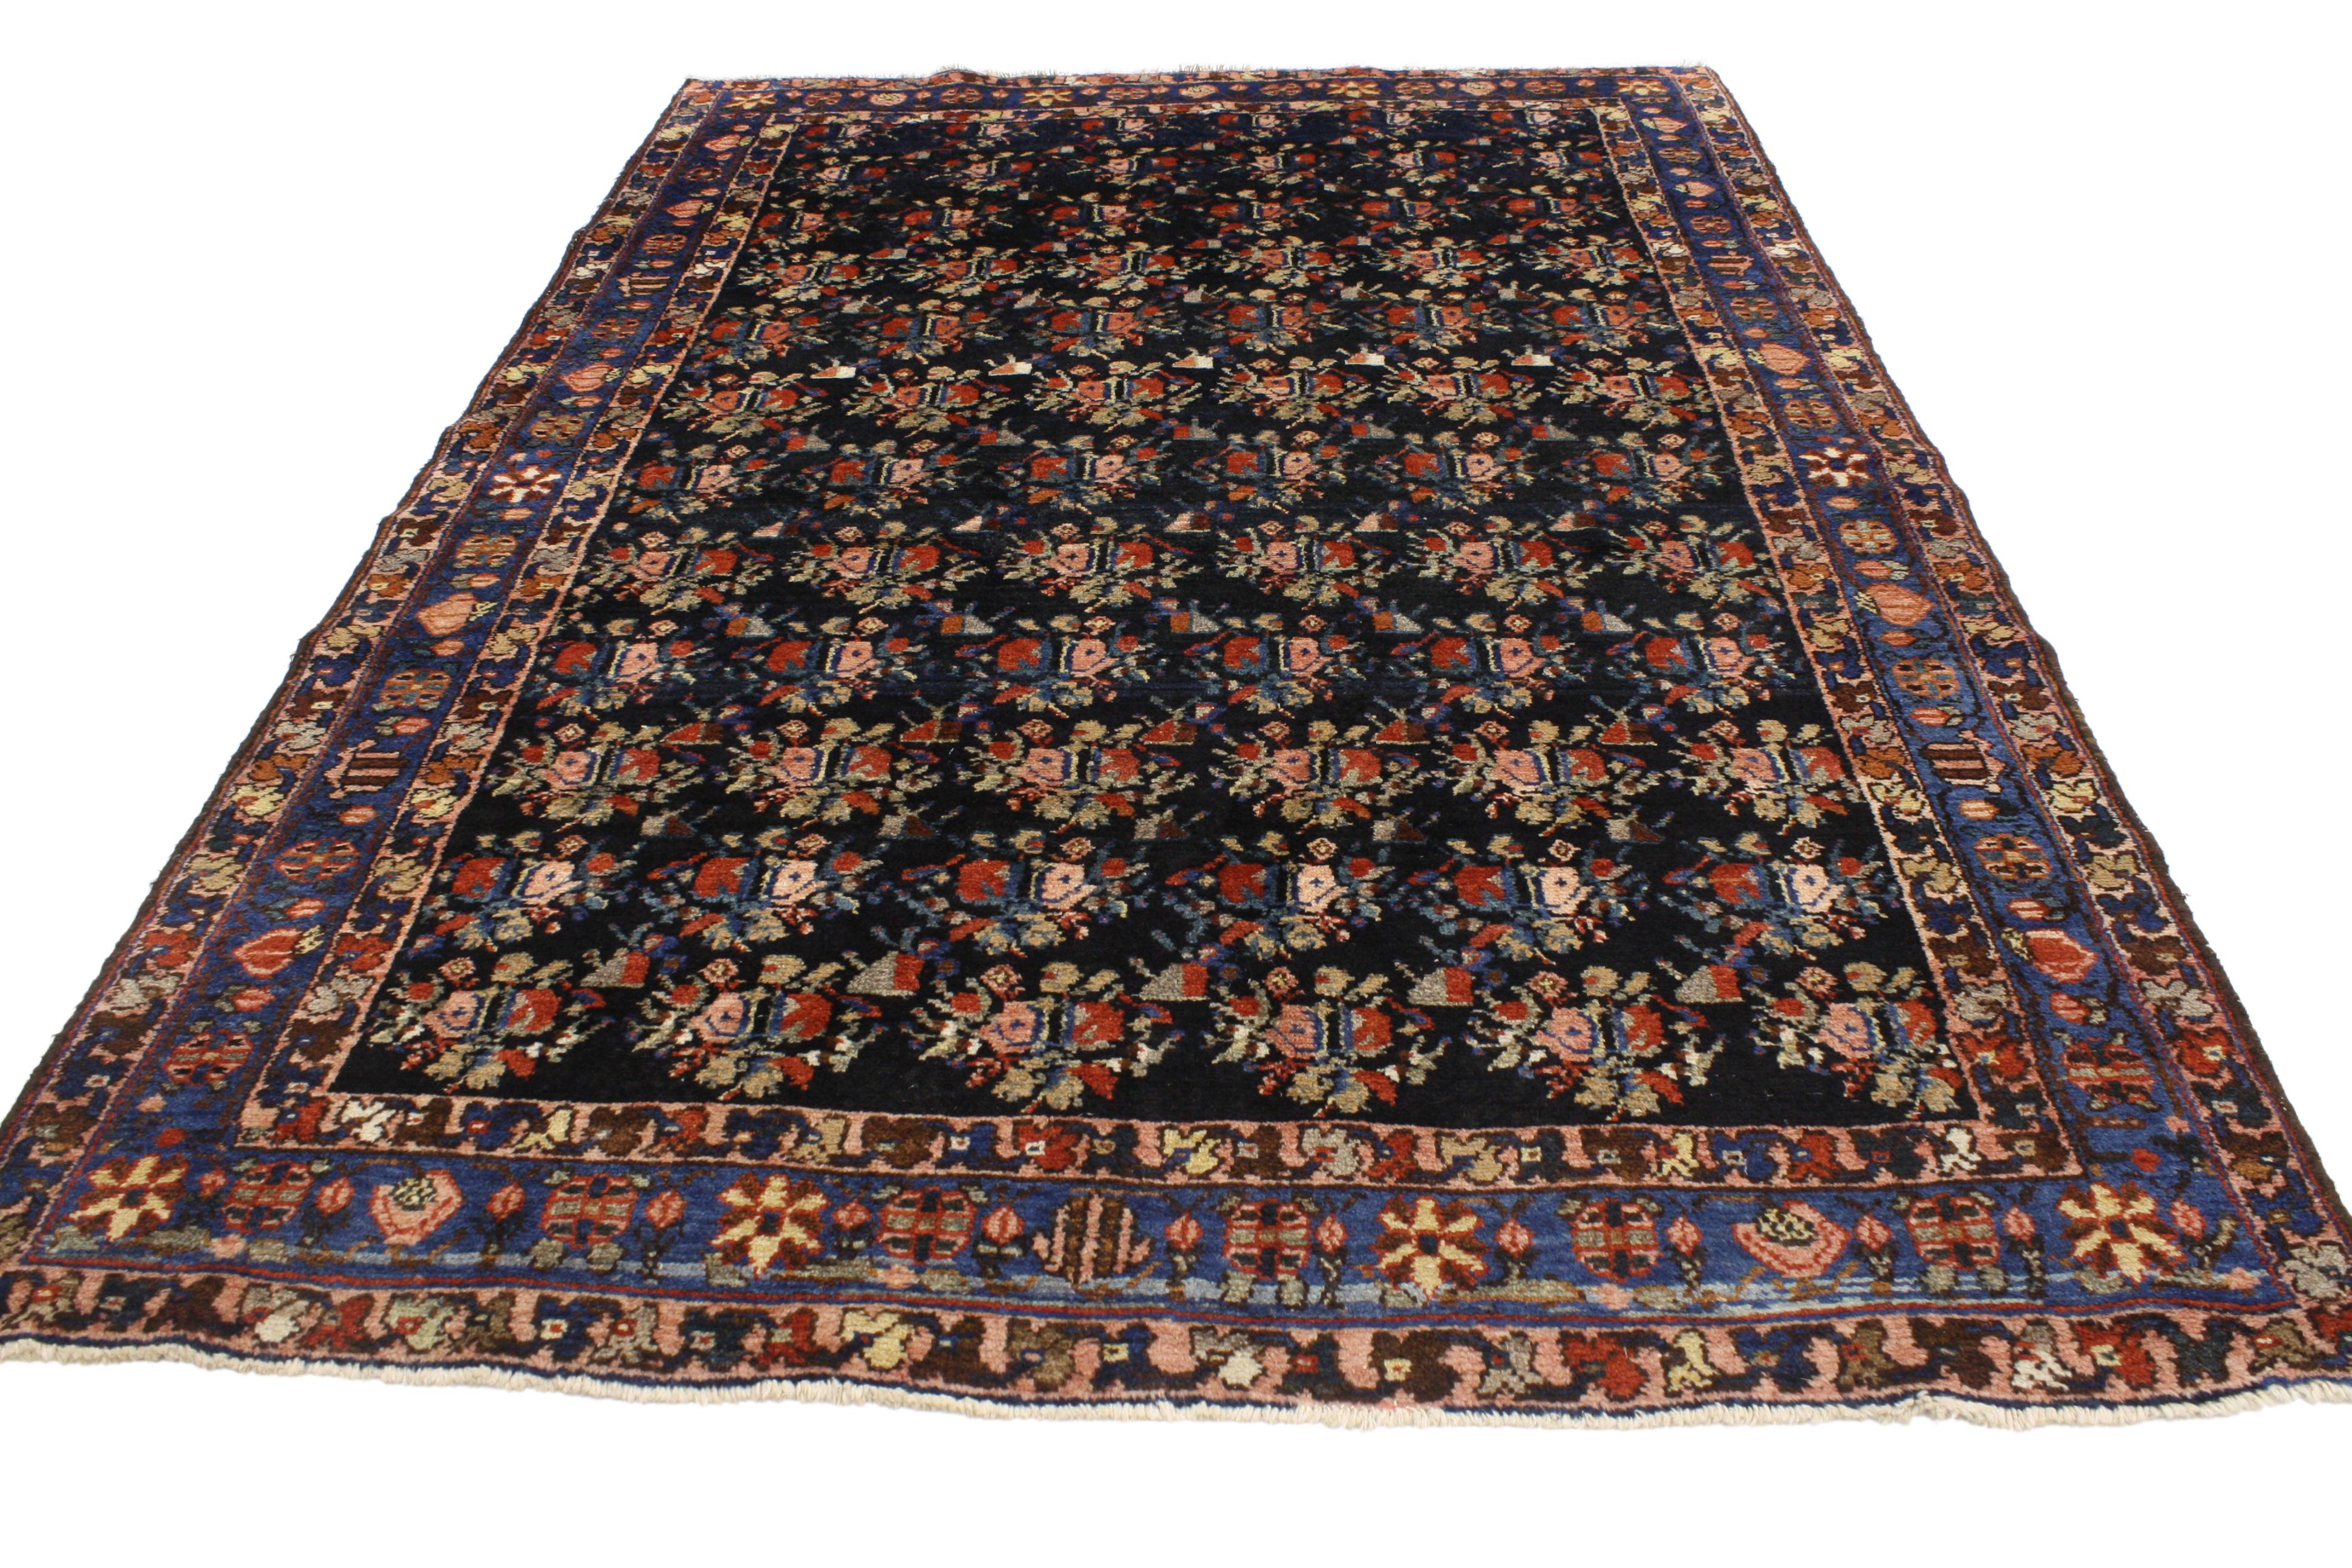 Wool Antique Persian Hamadan Rug with Art Deco Style, Entry or Foyer Rug